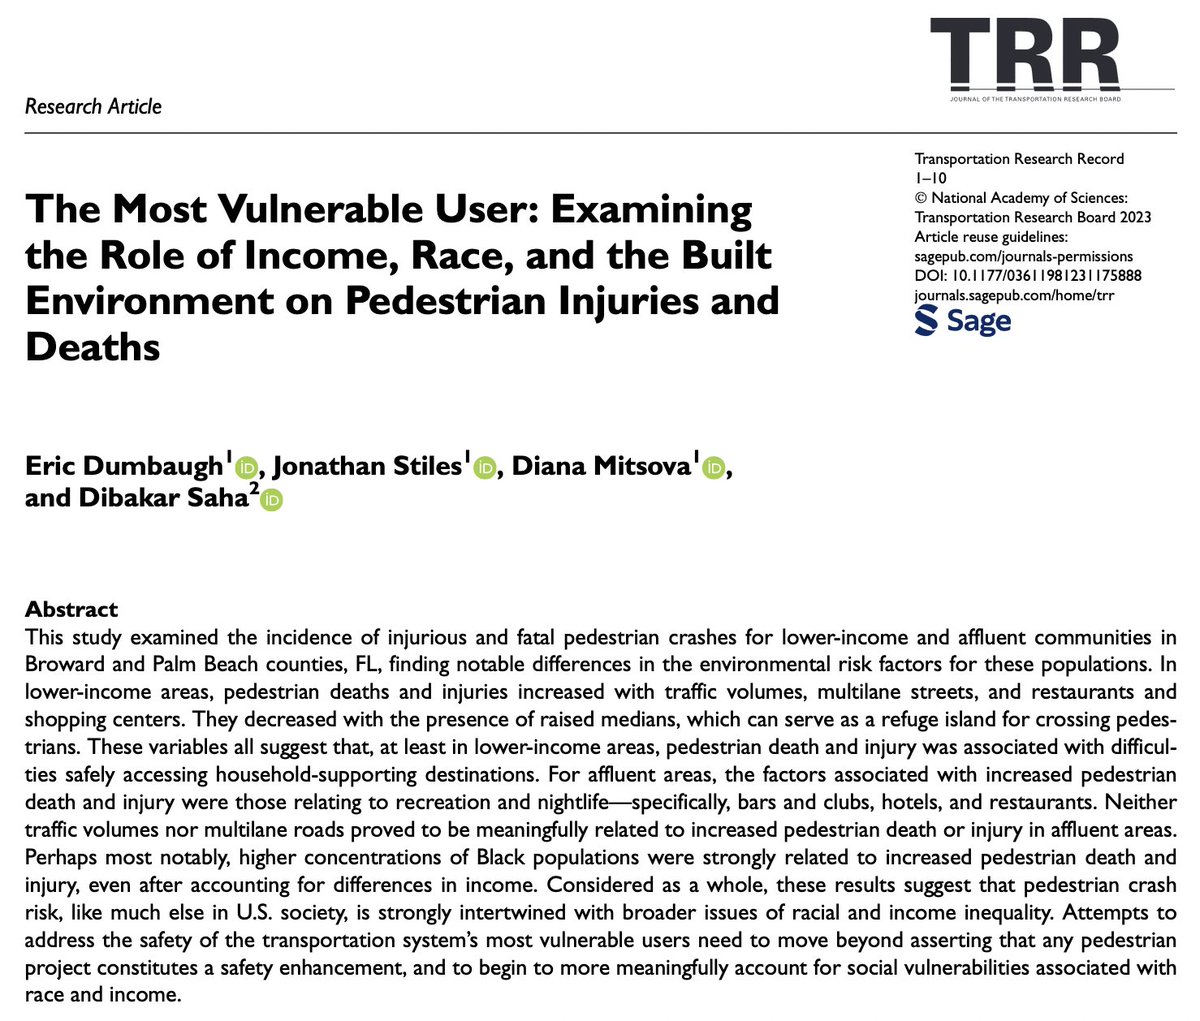 New paper with @FAU_Planning colleagues deepens understandings of vulnerable users in transport safety planning, showing how pedestrian crash risk is intertwined with racial and income inequality: doi.org/10.1177/036119…